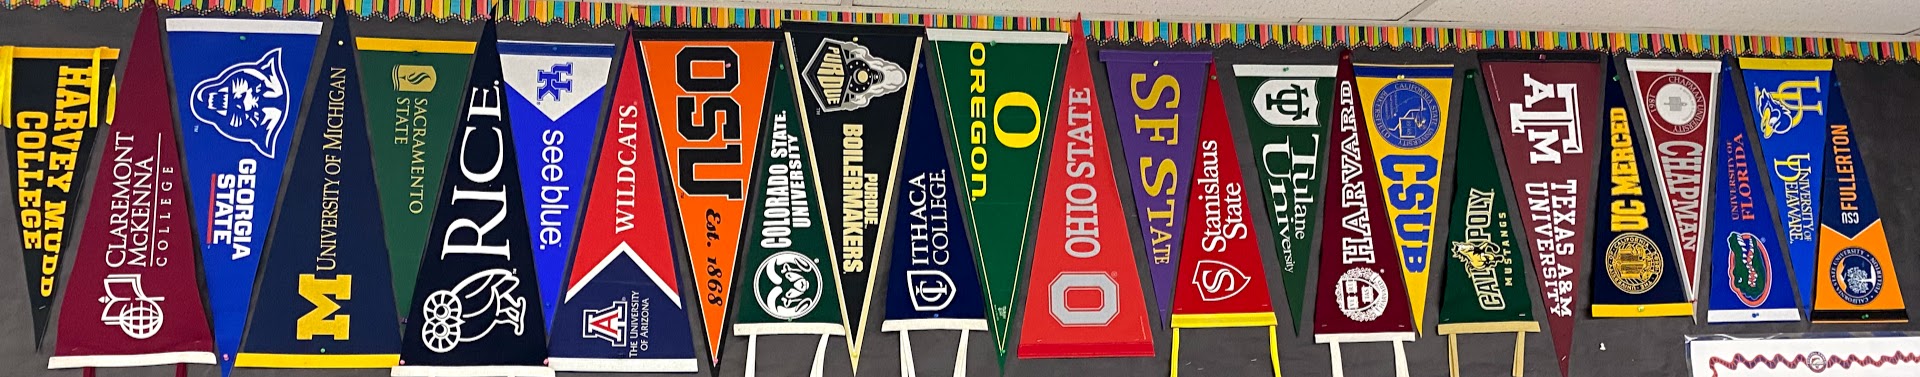 various college flags